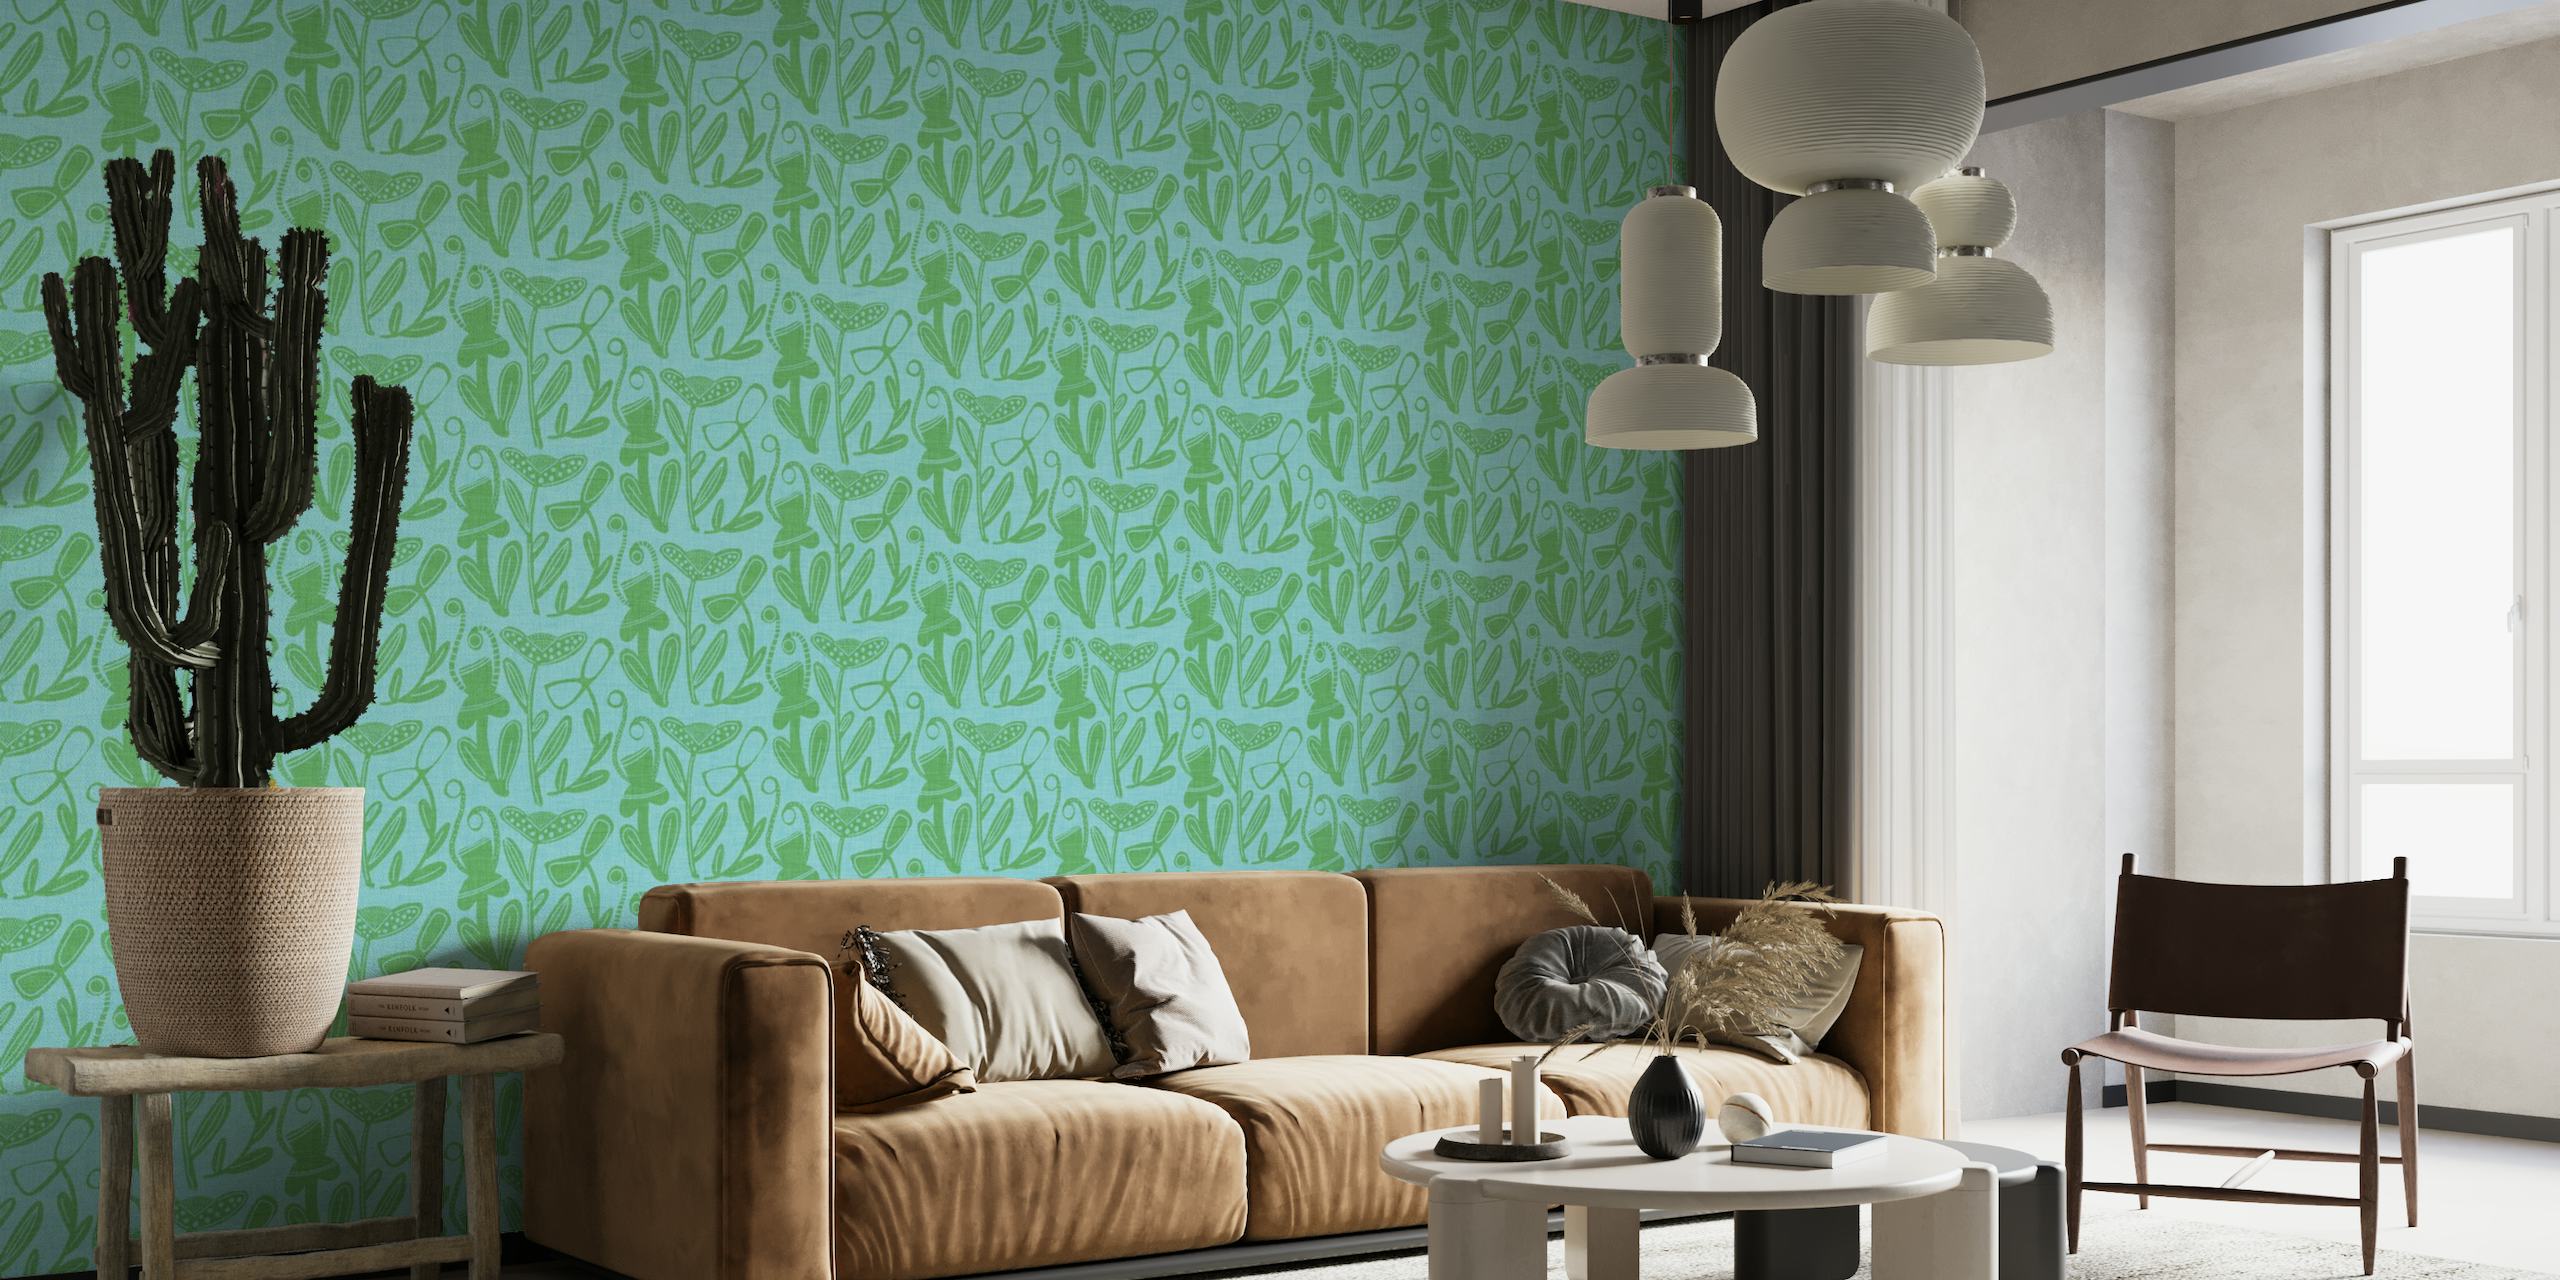 Light blue and green floral bohemian-style wall mural